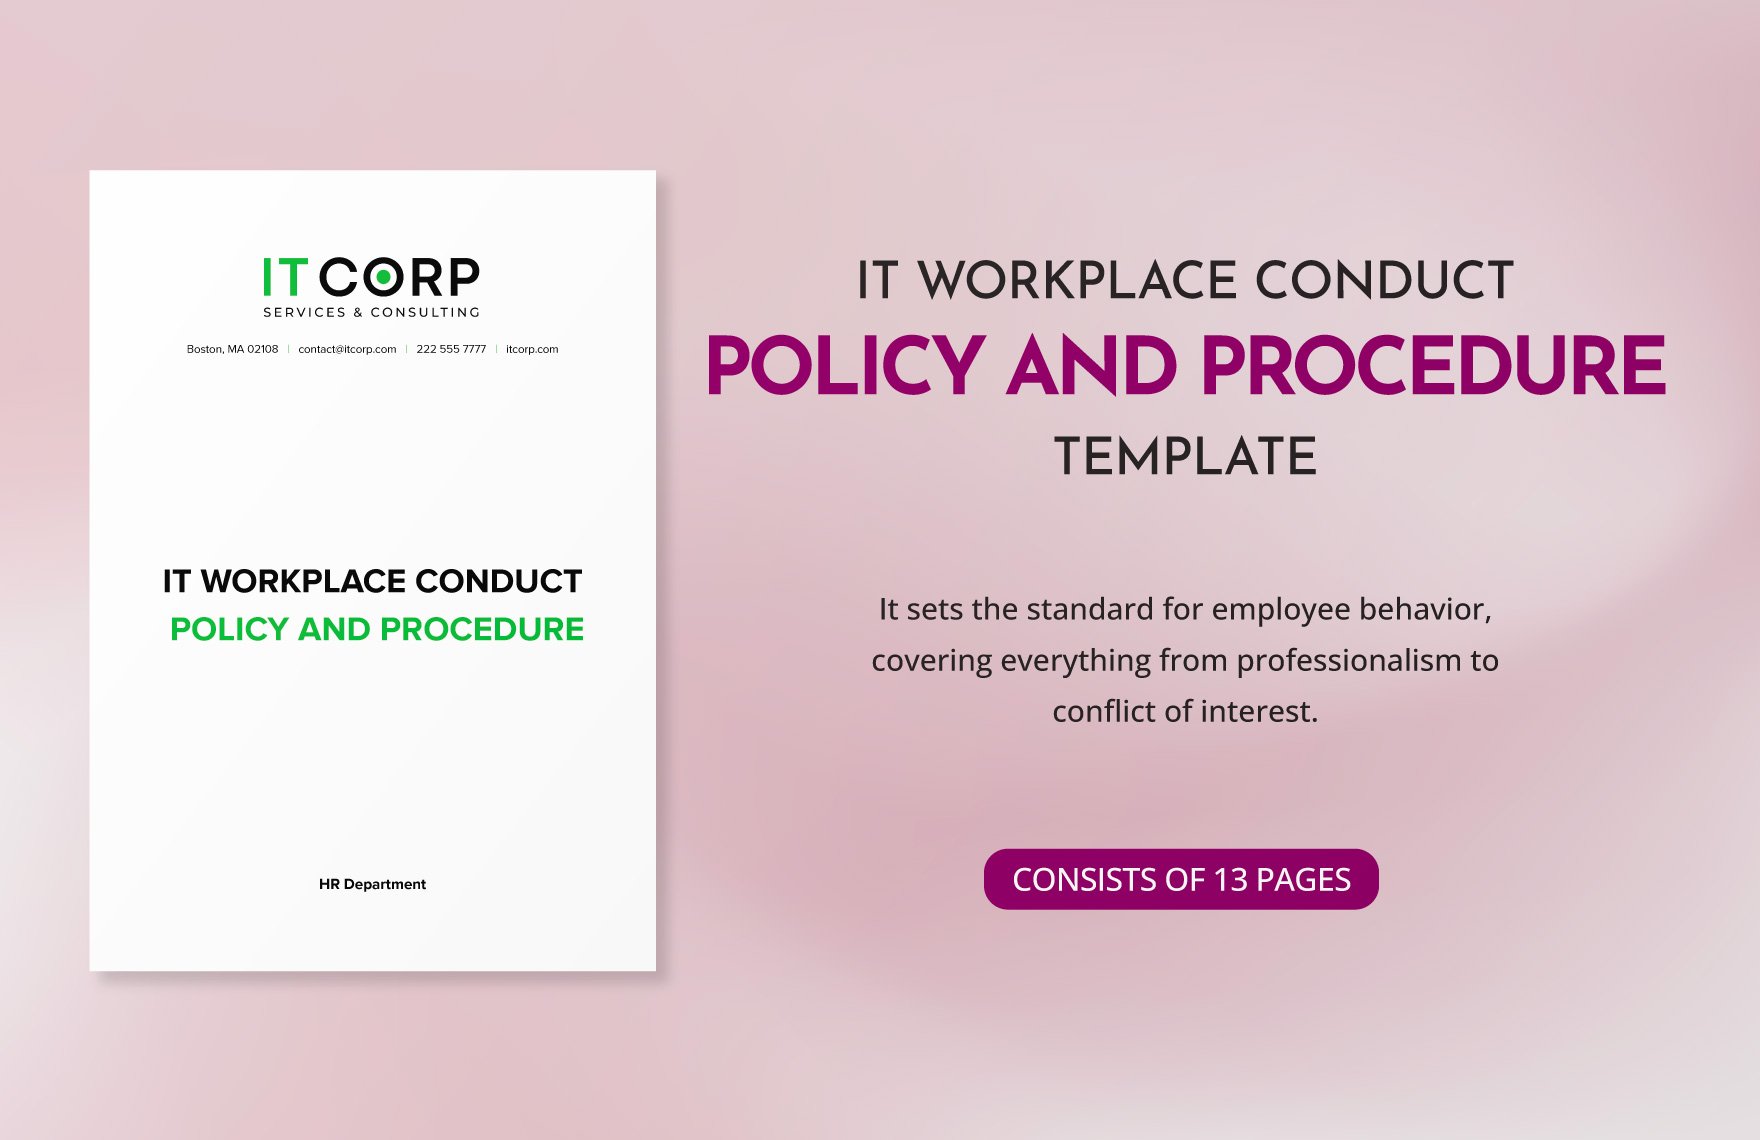 IT Workplace Conduct Policy and Procedure Template